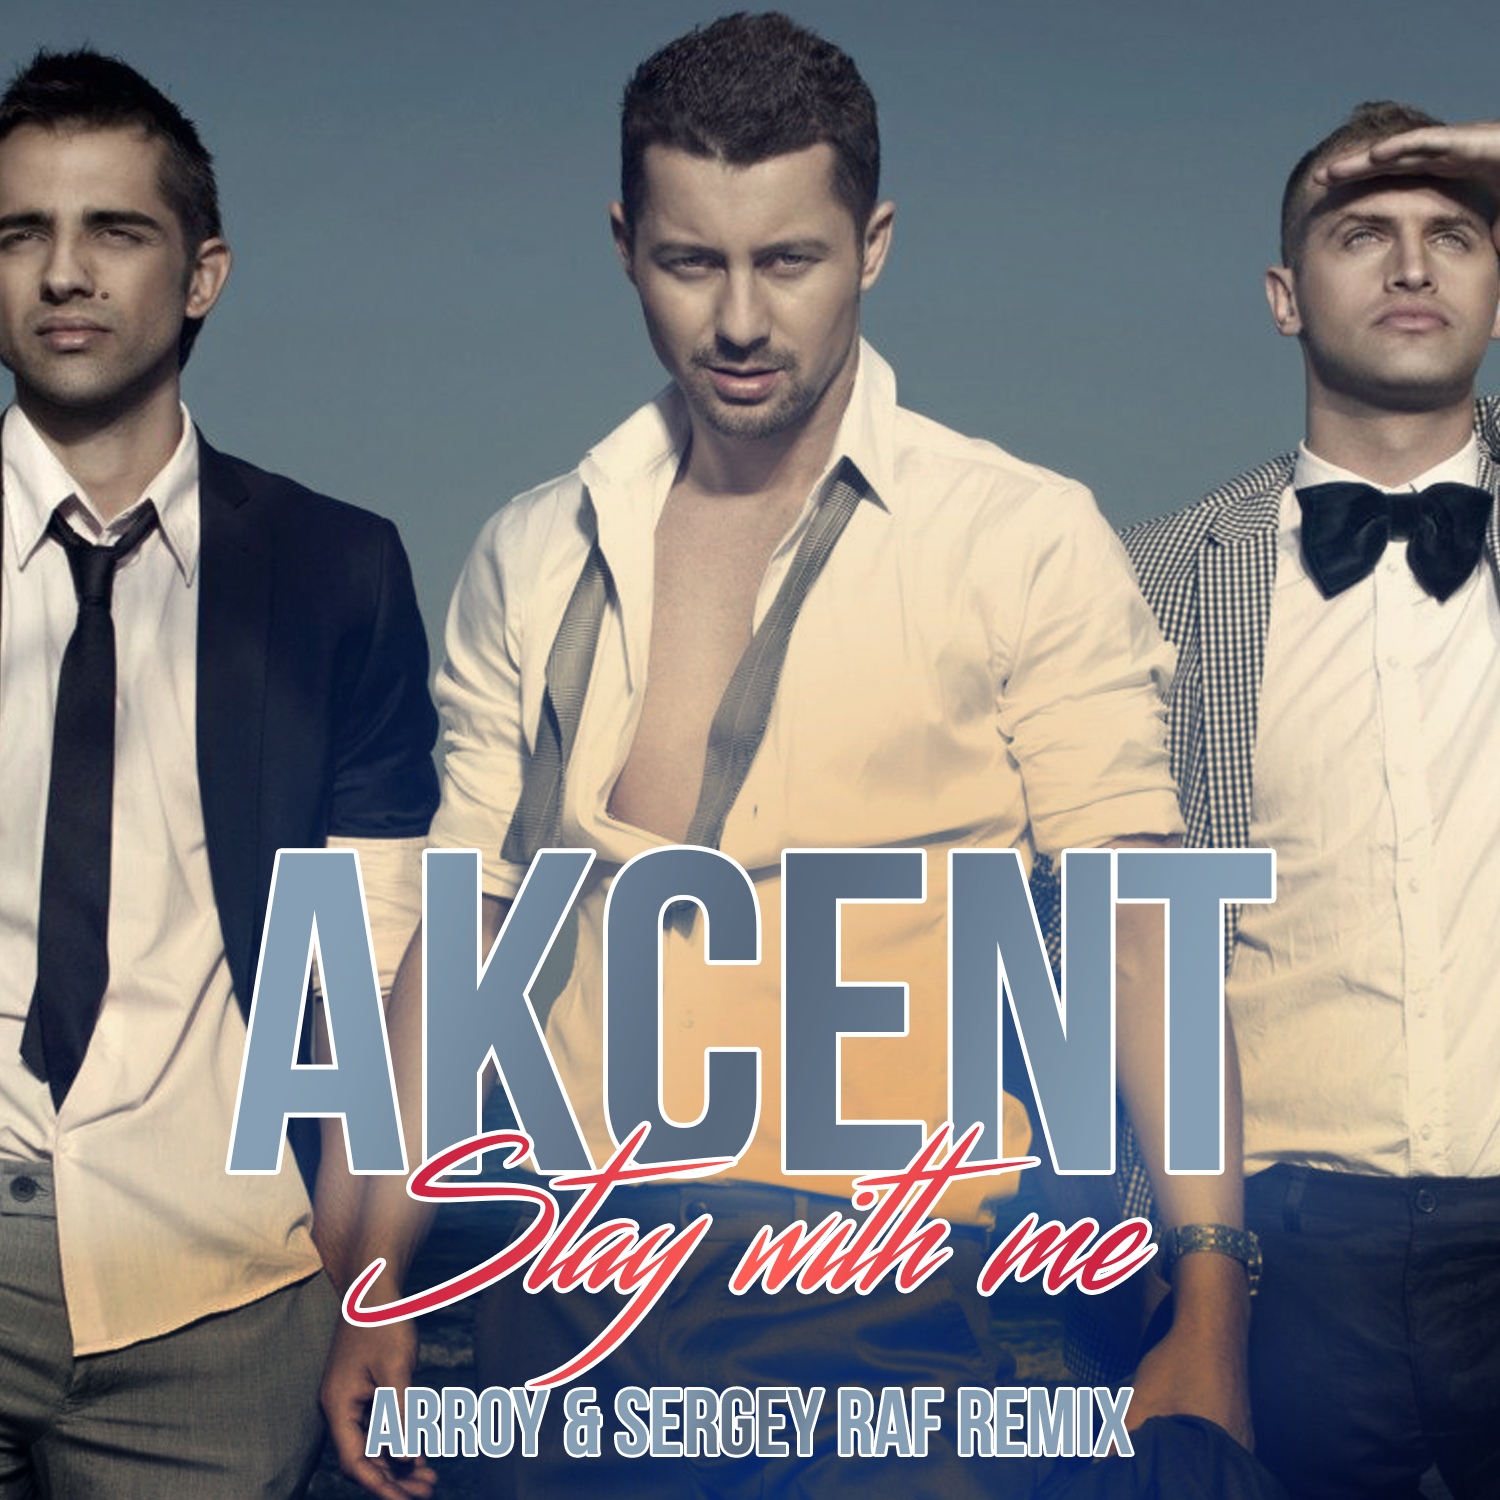 akcent songs free download 320kbps